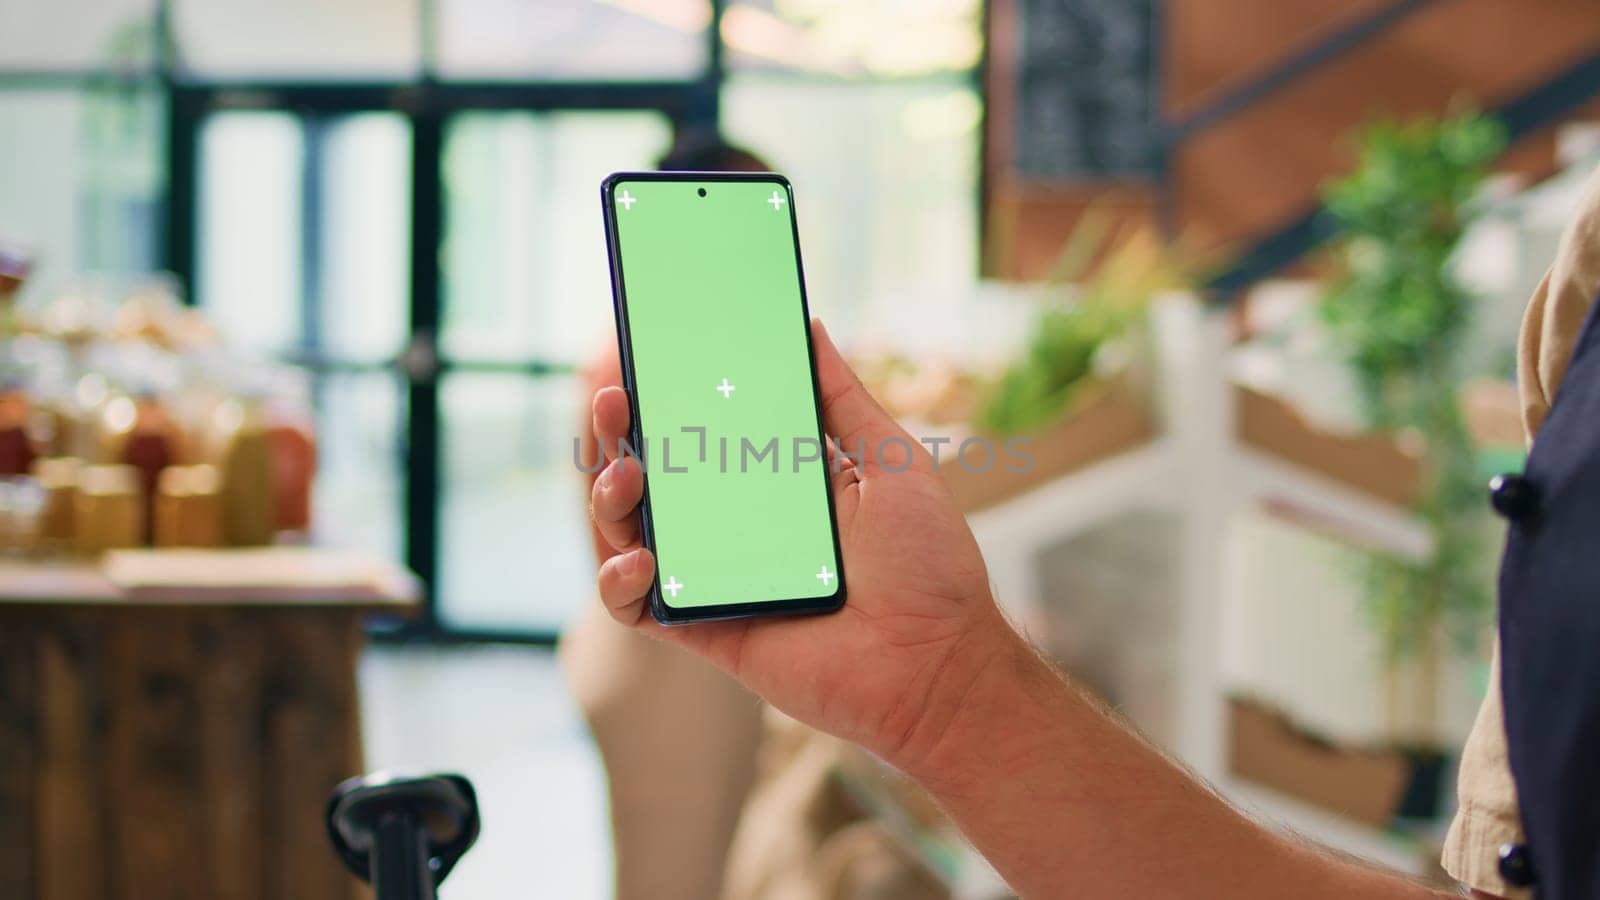 Owner uses greenscreen on smartphone by DCStudio